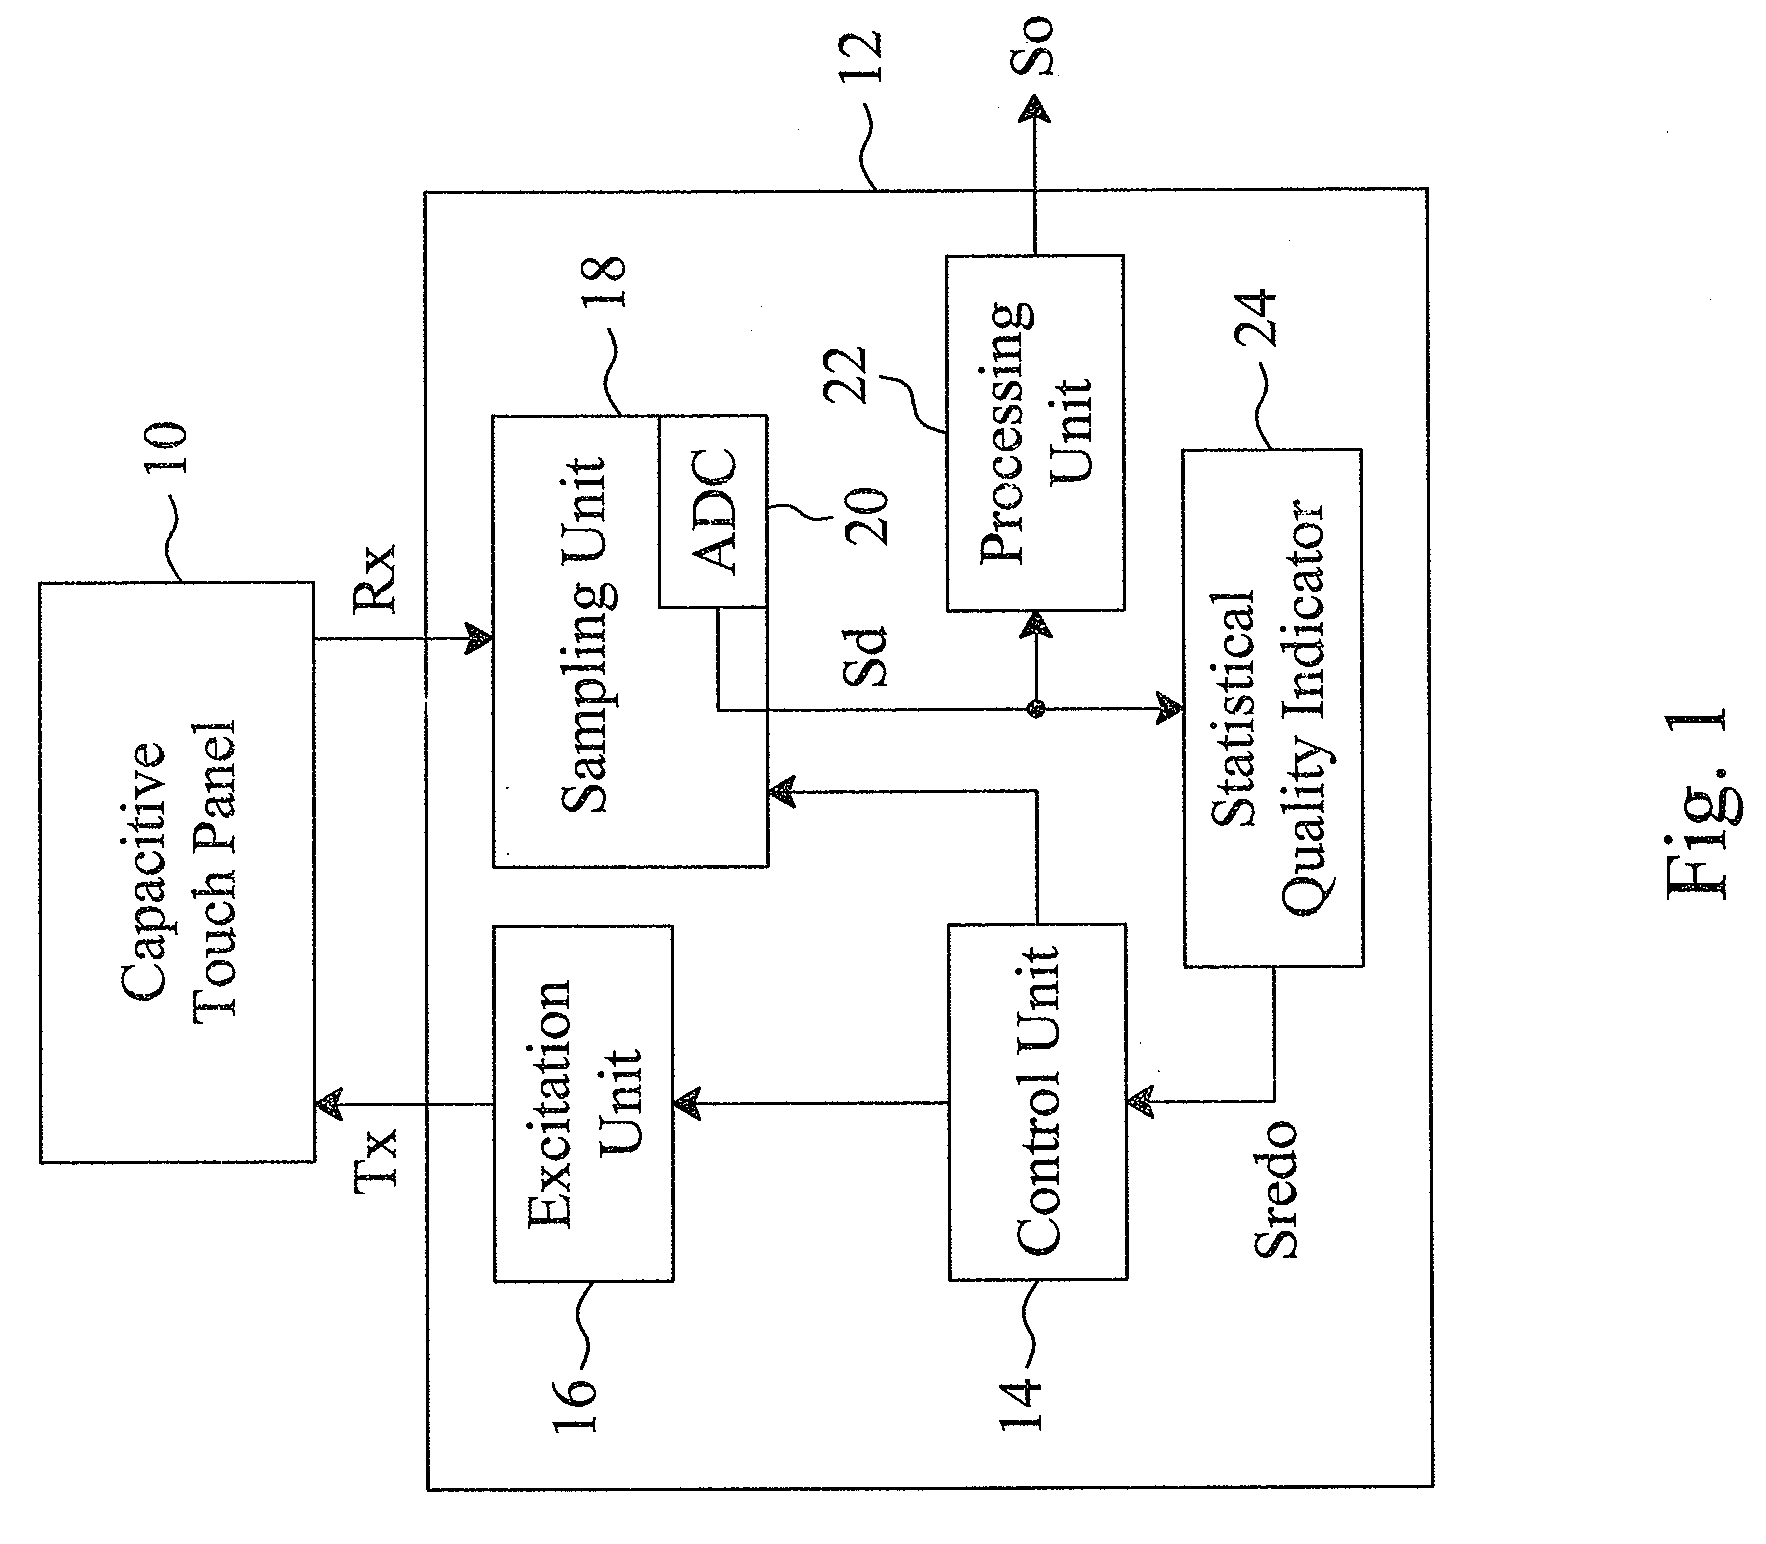 Statistical analyzing method and statistical quality indicator for reliability improvement of a capacitive touch device